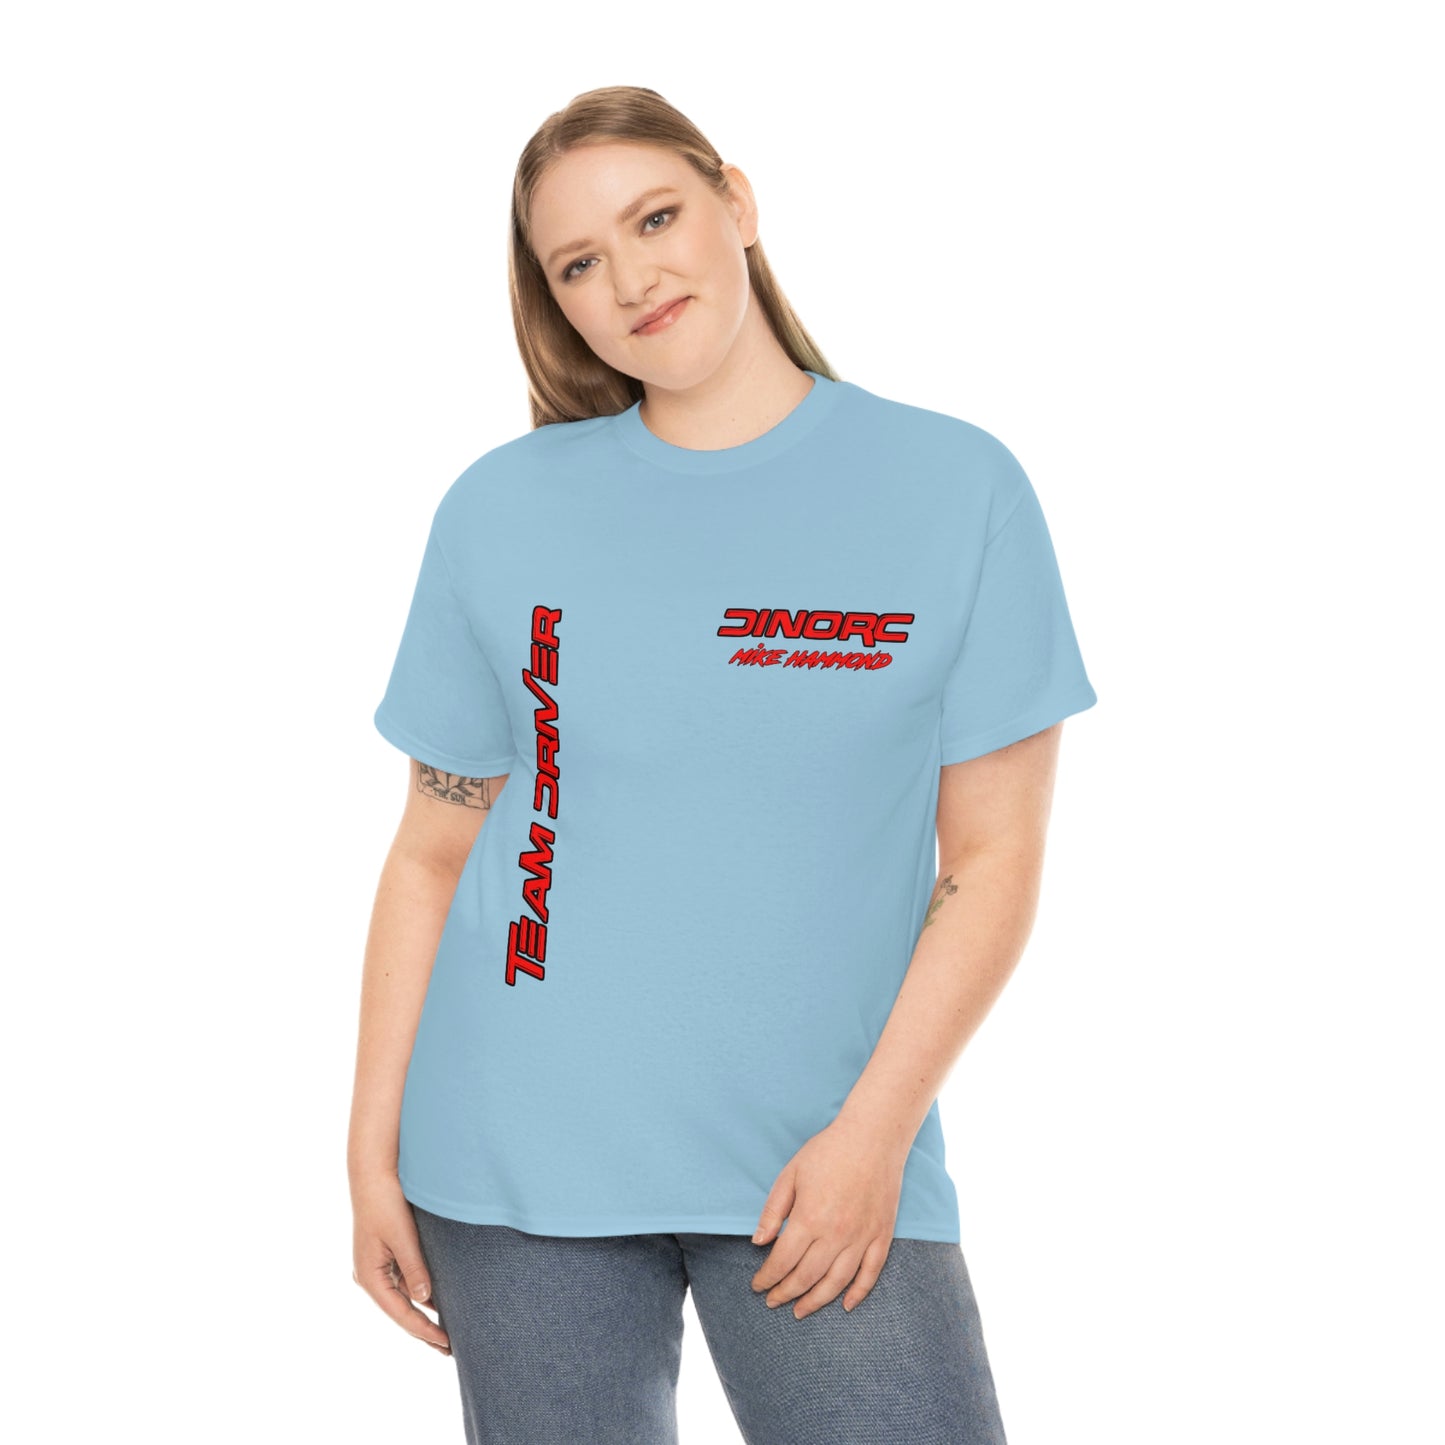 Vertical Team Driver Mike Hammond Front and Back DinoRc Logo T-Shirt S-5x 5 colors